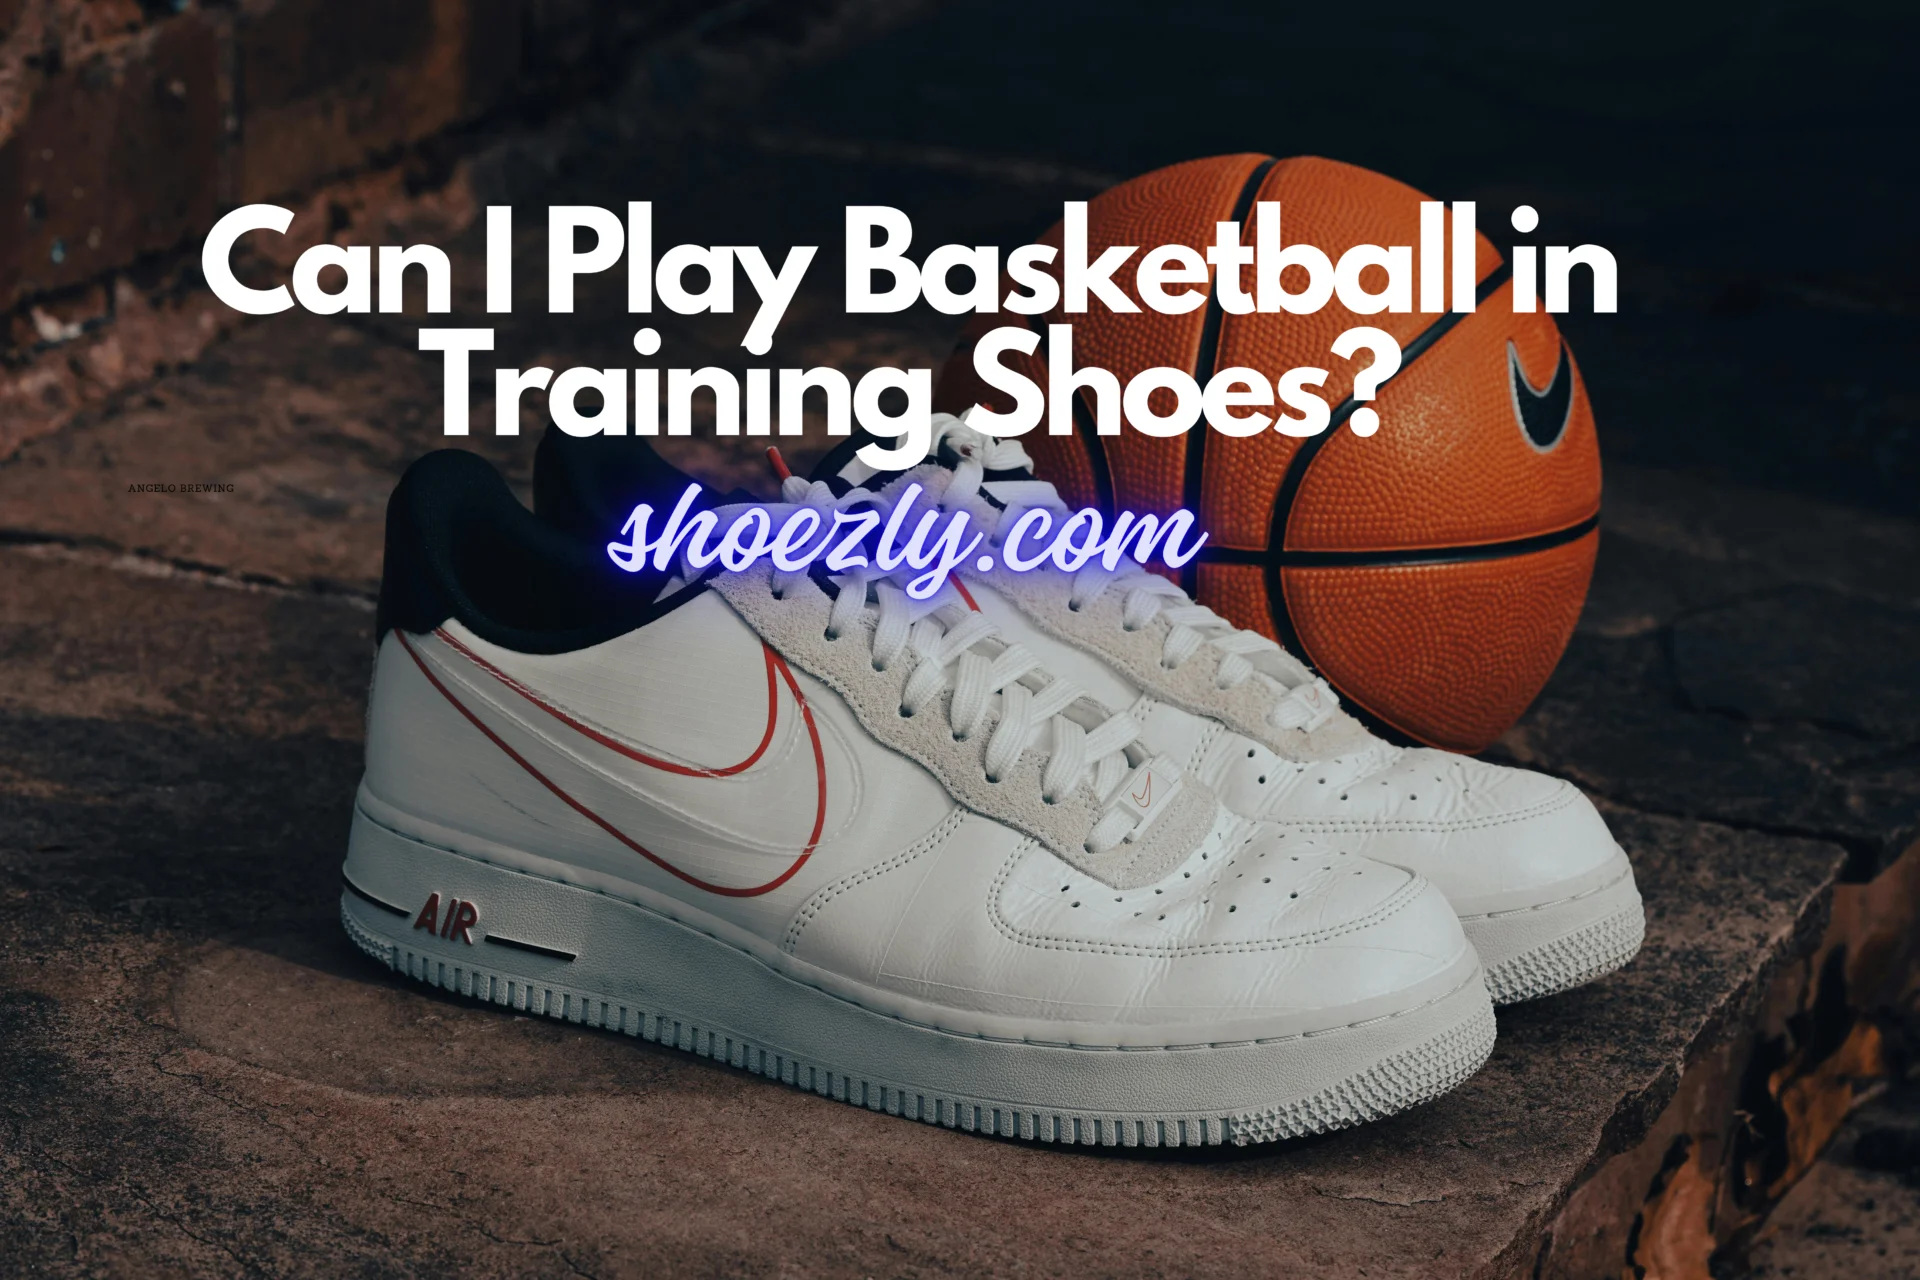 Can I Play Basketball in Training Shoes?